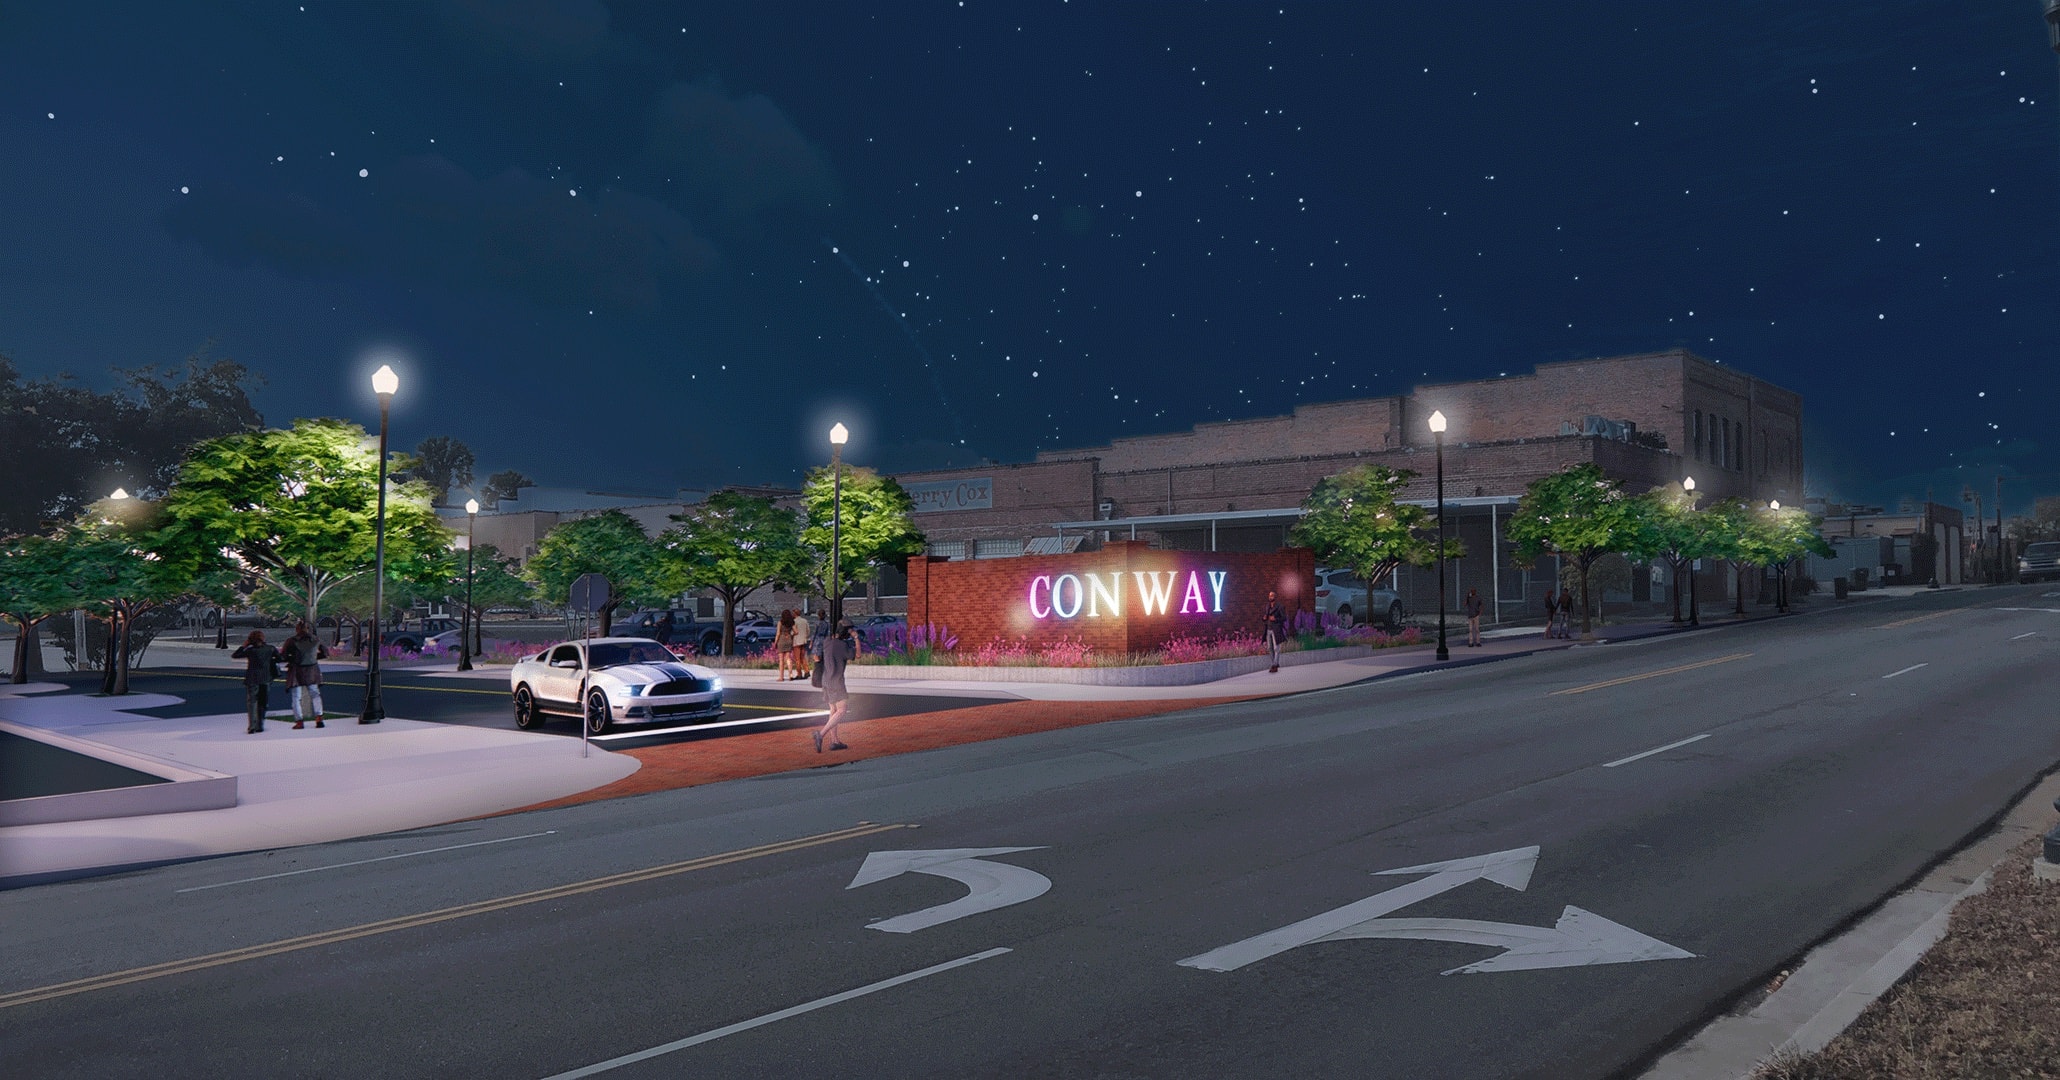 BOUDREAUX planners worked with City of Conway to develop a Master Plan for their Downtown and Riverfront areas